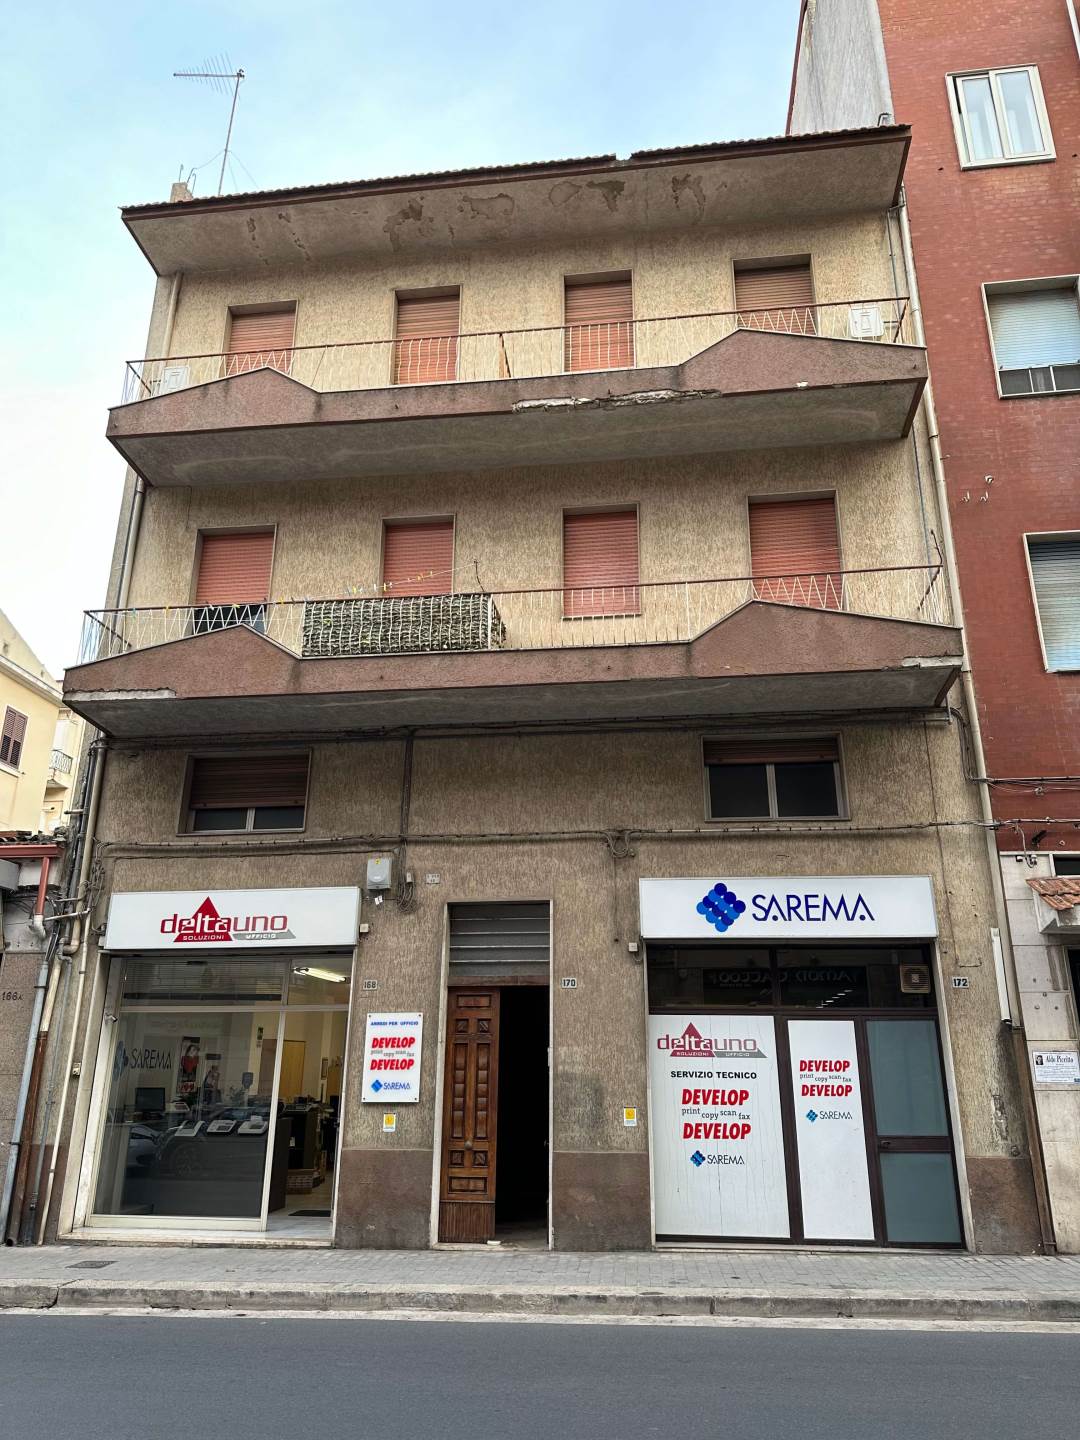 VIA CARDUCCI, RAGUSA, Palace for sale of 496 Sq. mt., Habitable, Heating Individual heating system, Energetic class: G, Epi: 275 kwh/m2 year, placed 